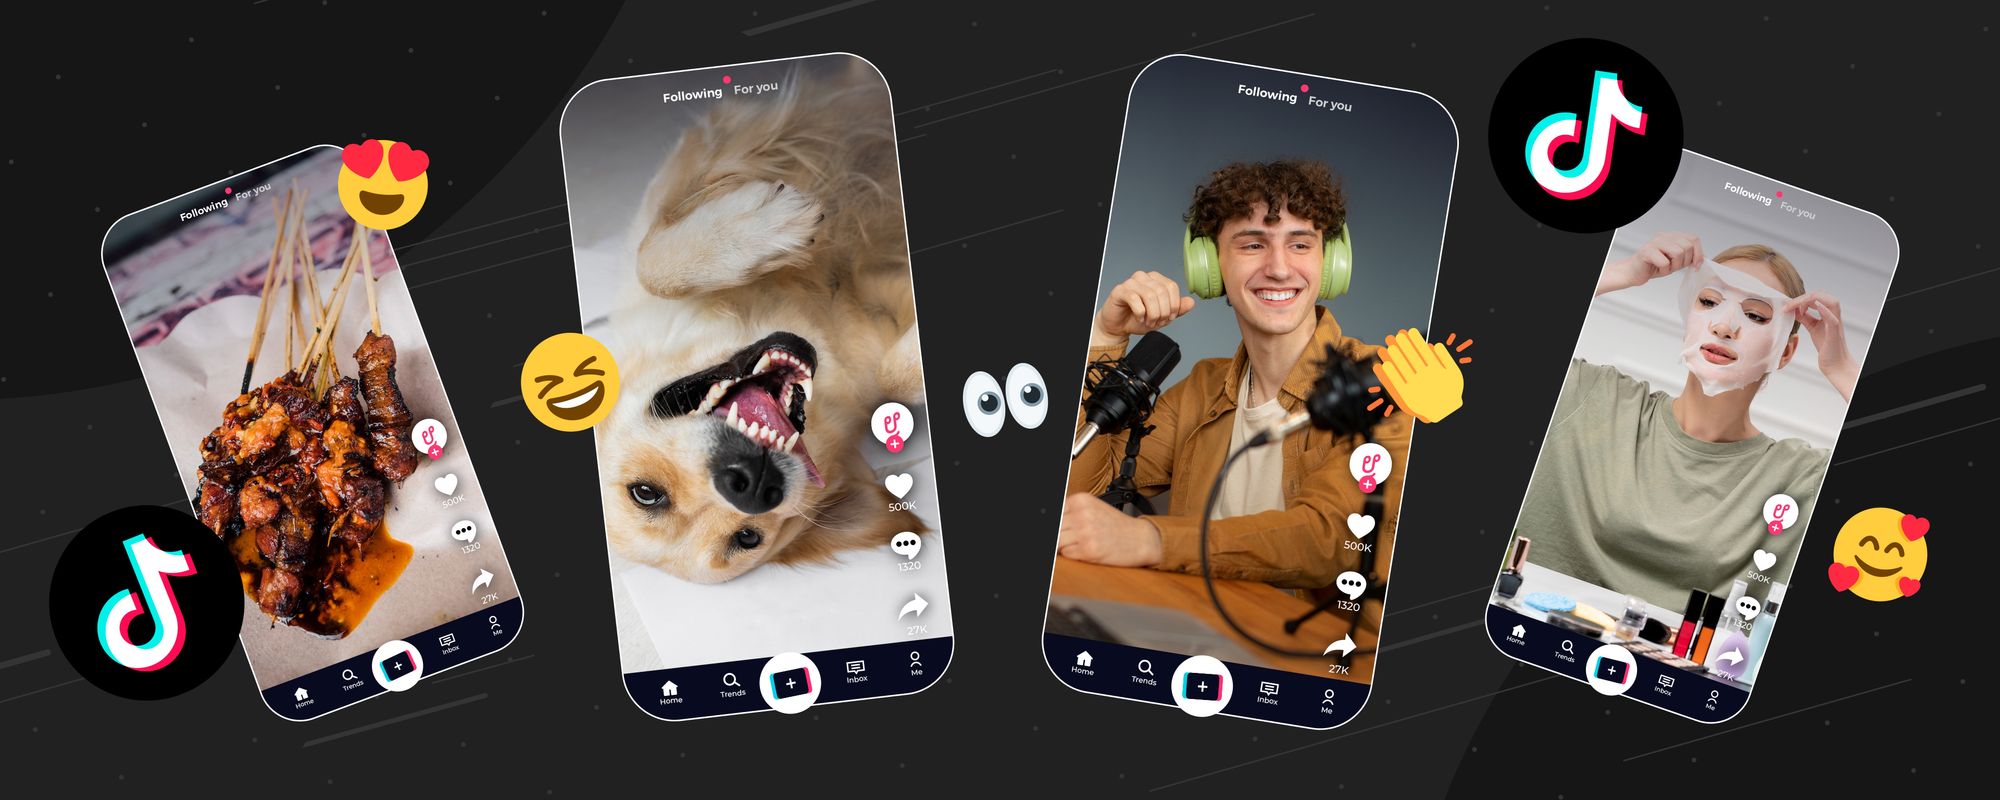 Examples of TikTok creators to show the range of content covered by the TikTok algorithm.